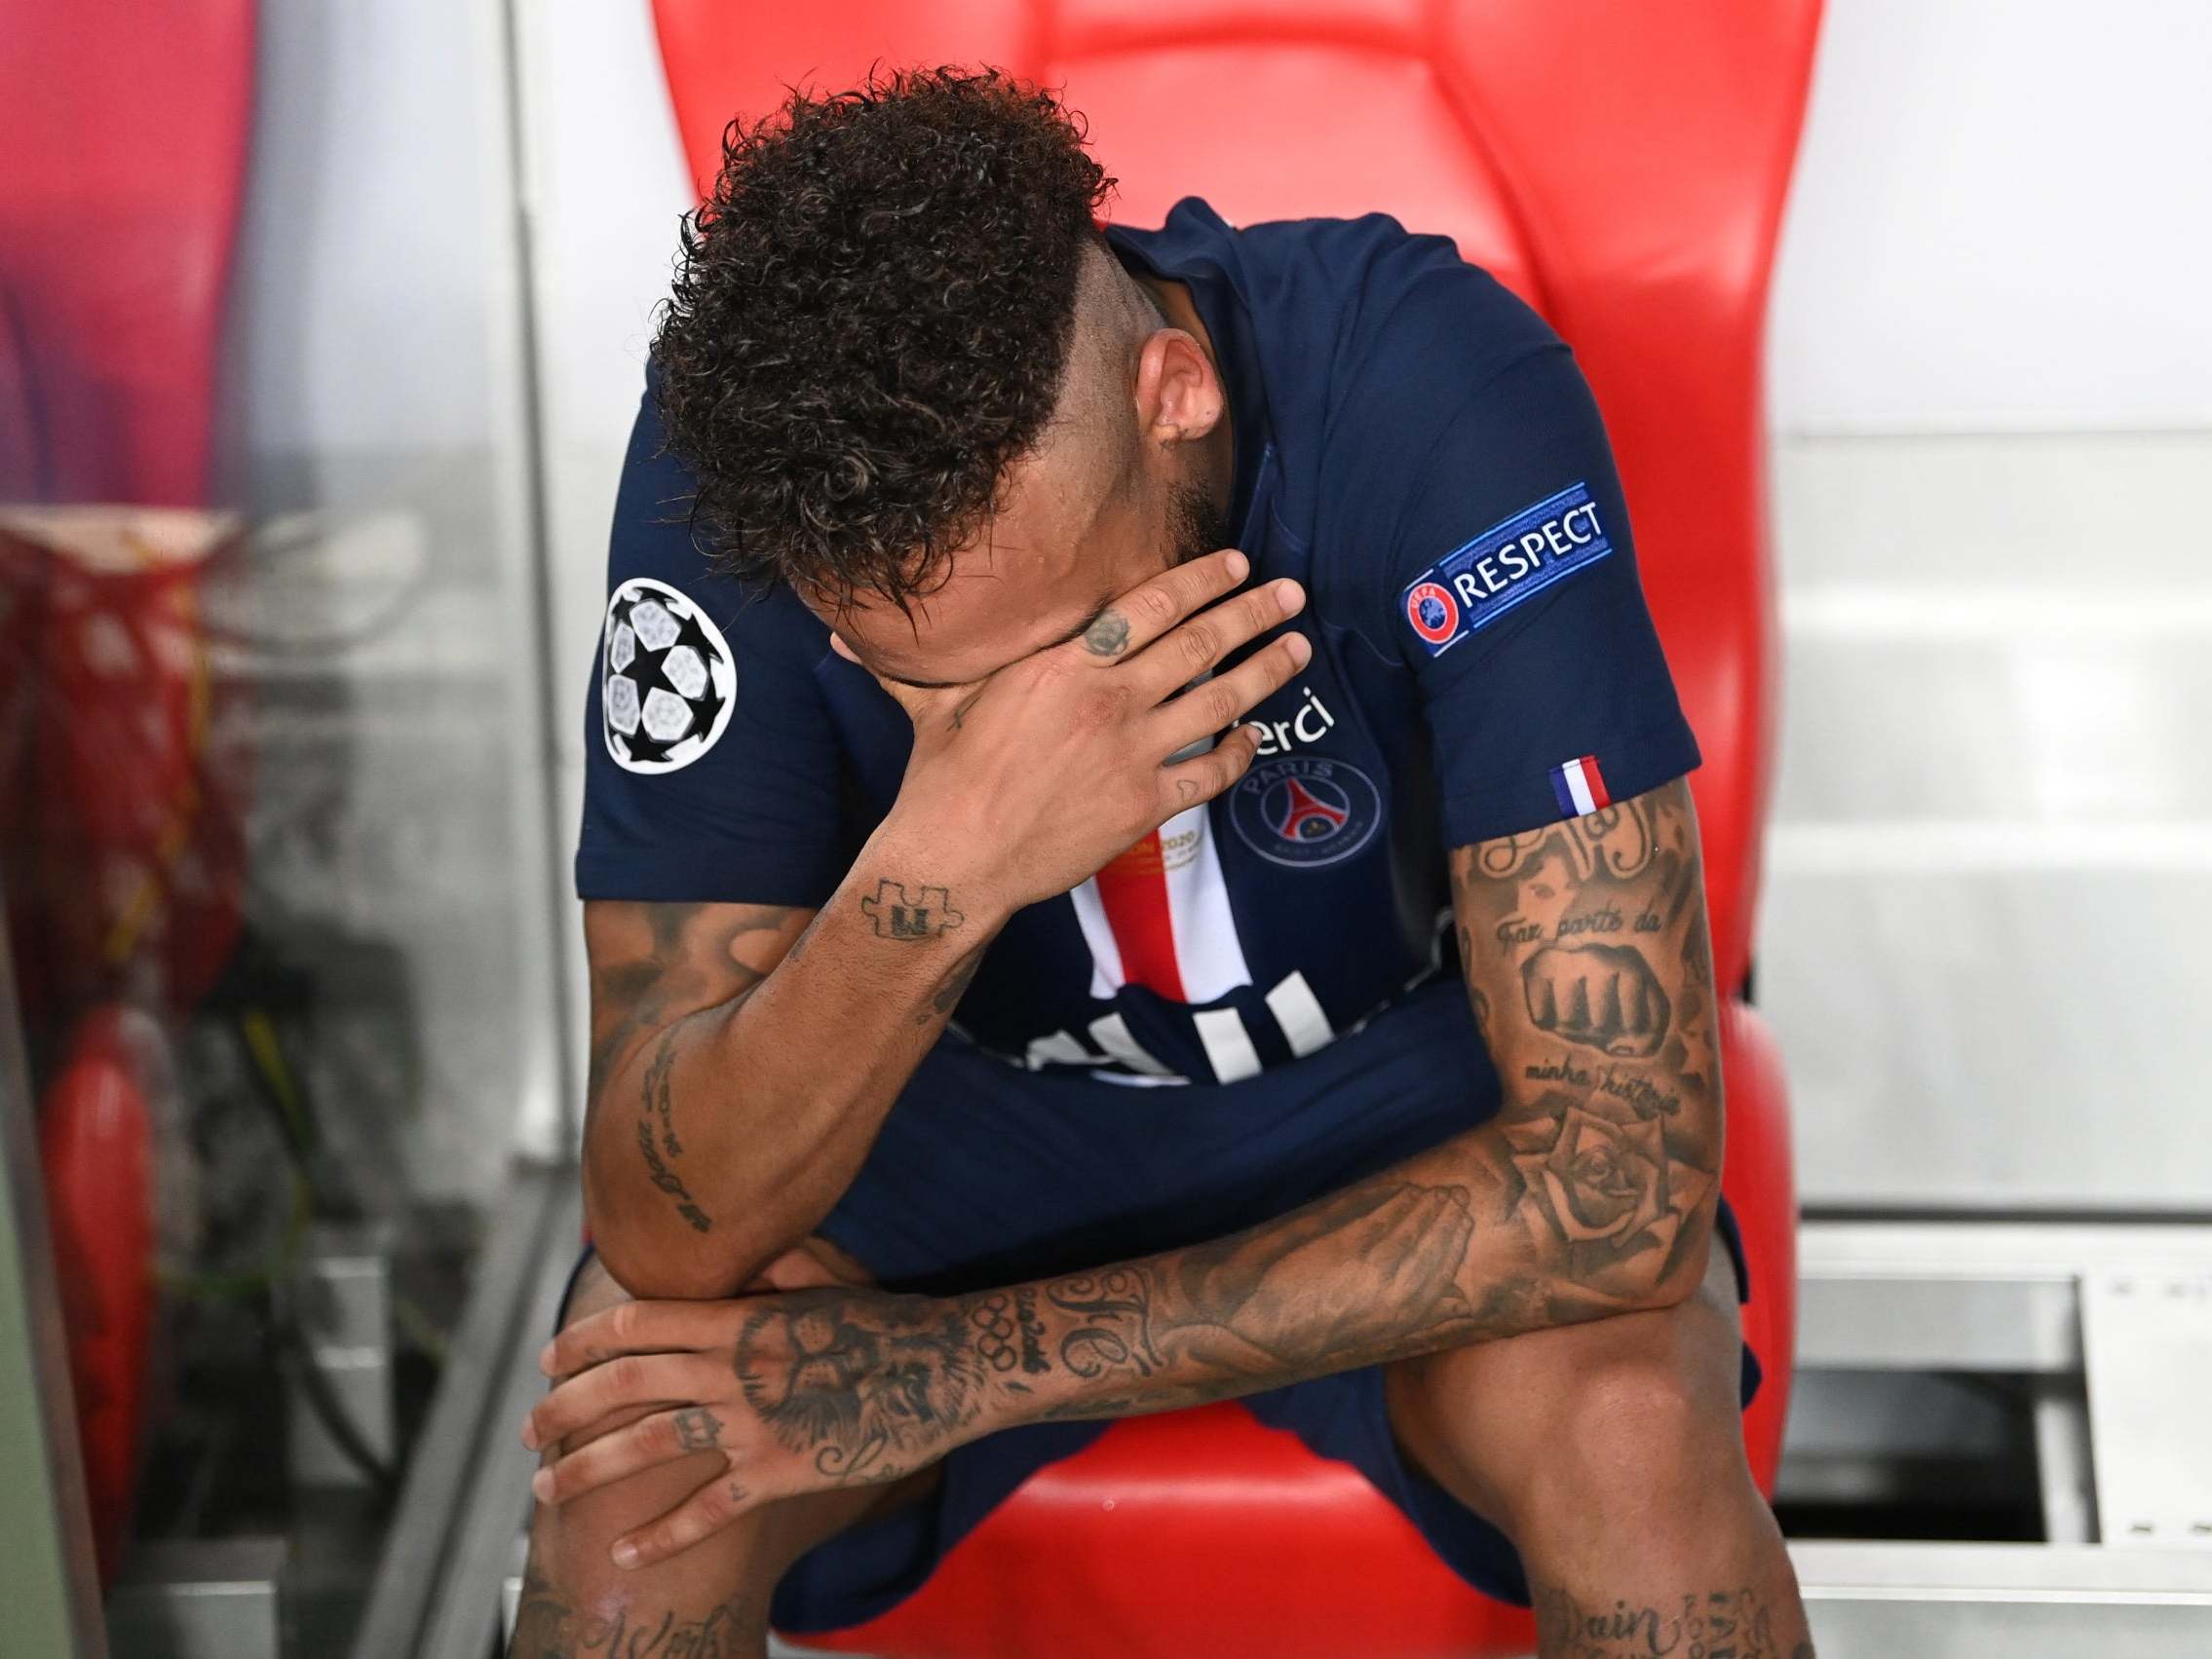 Neymar falls short in Champions League final and left wondering if his day at PSG will ever come